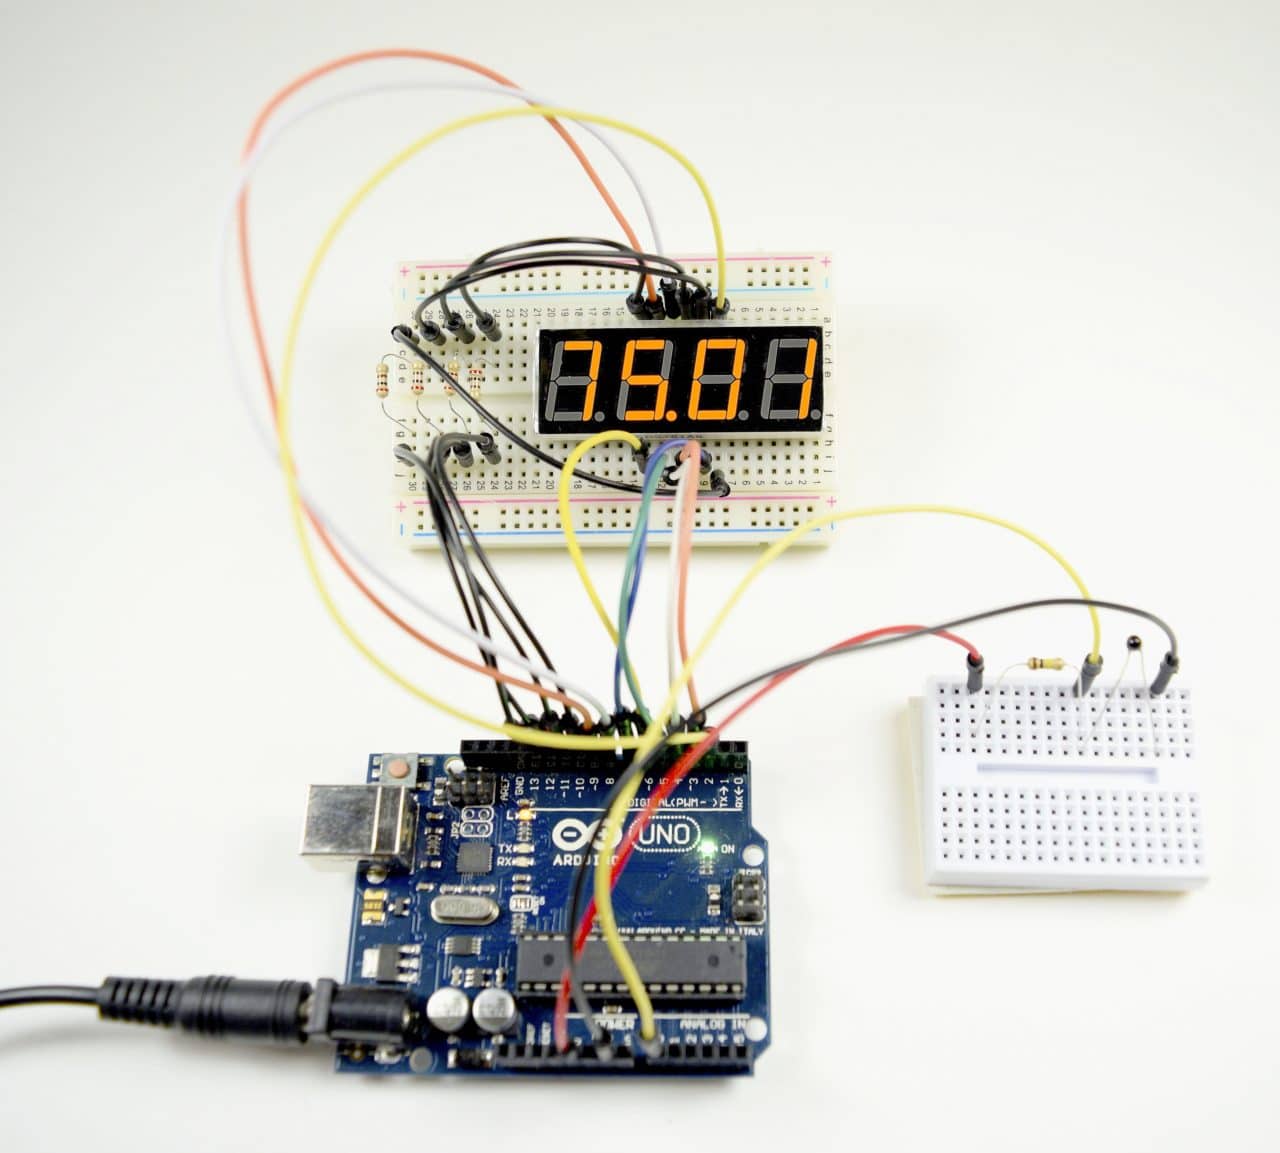 How to Set up Seven Segment Displays on the Arduino - Circuit Basics